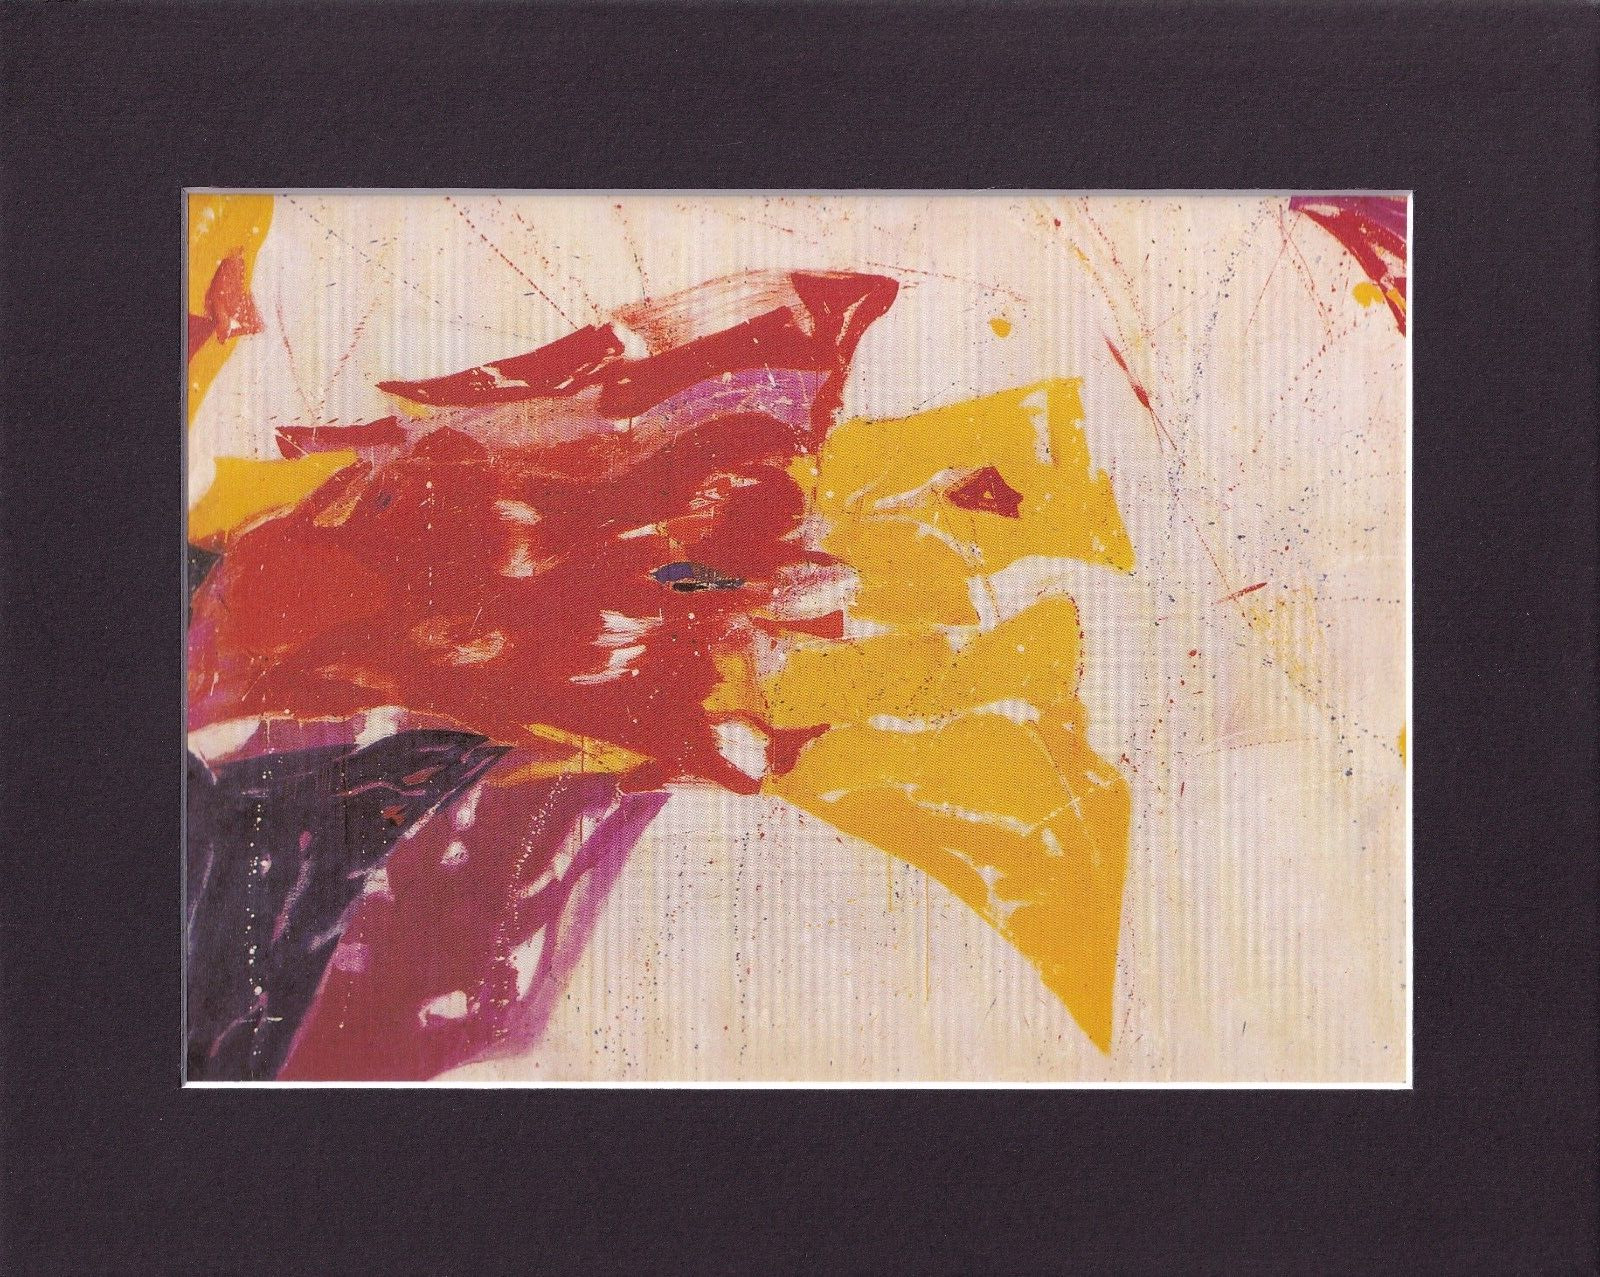 8X10 Matted Print Art Classic Picture: Sam Francis, 1959 Untitled